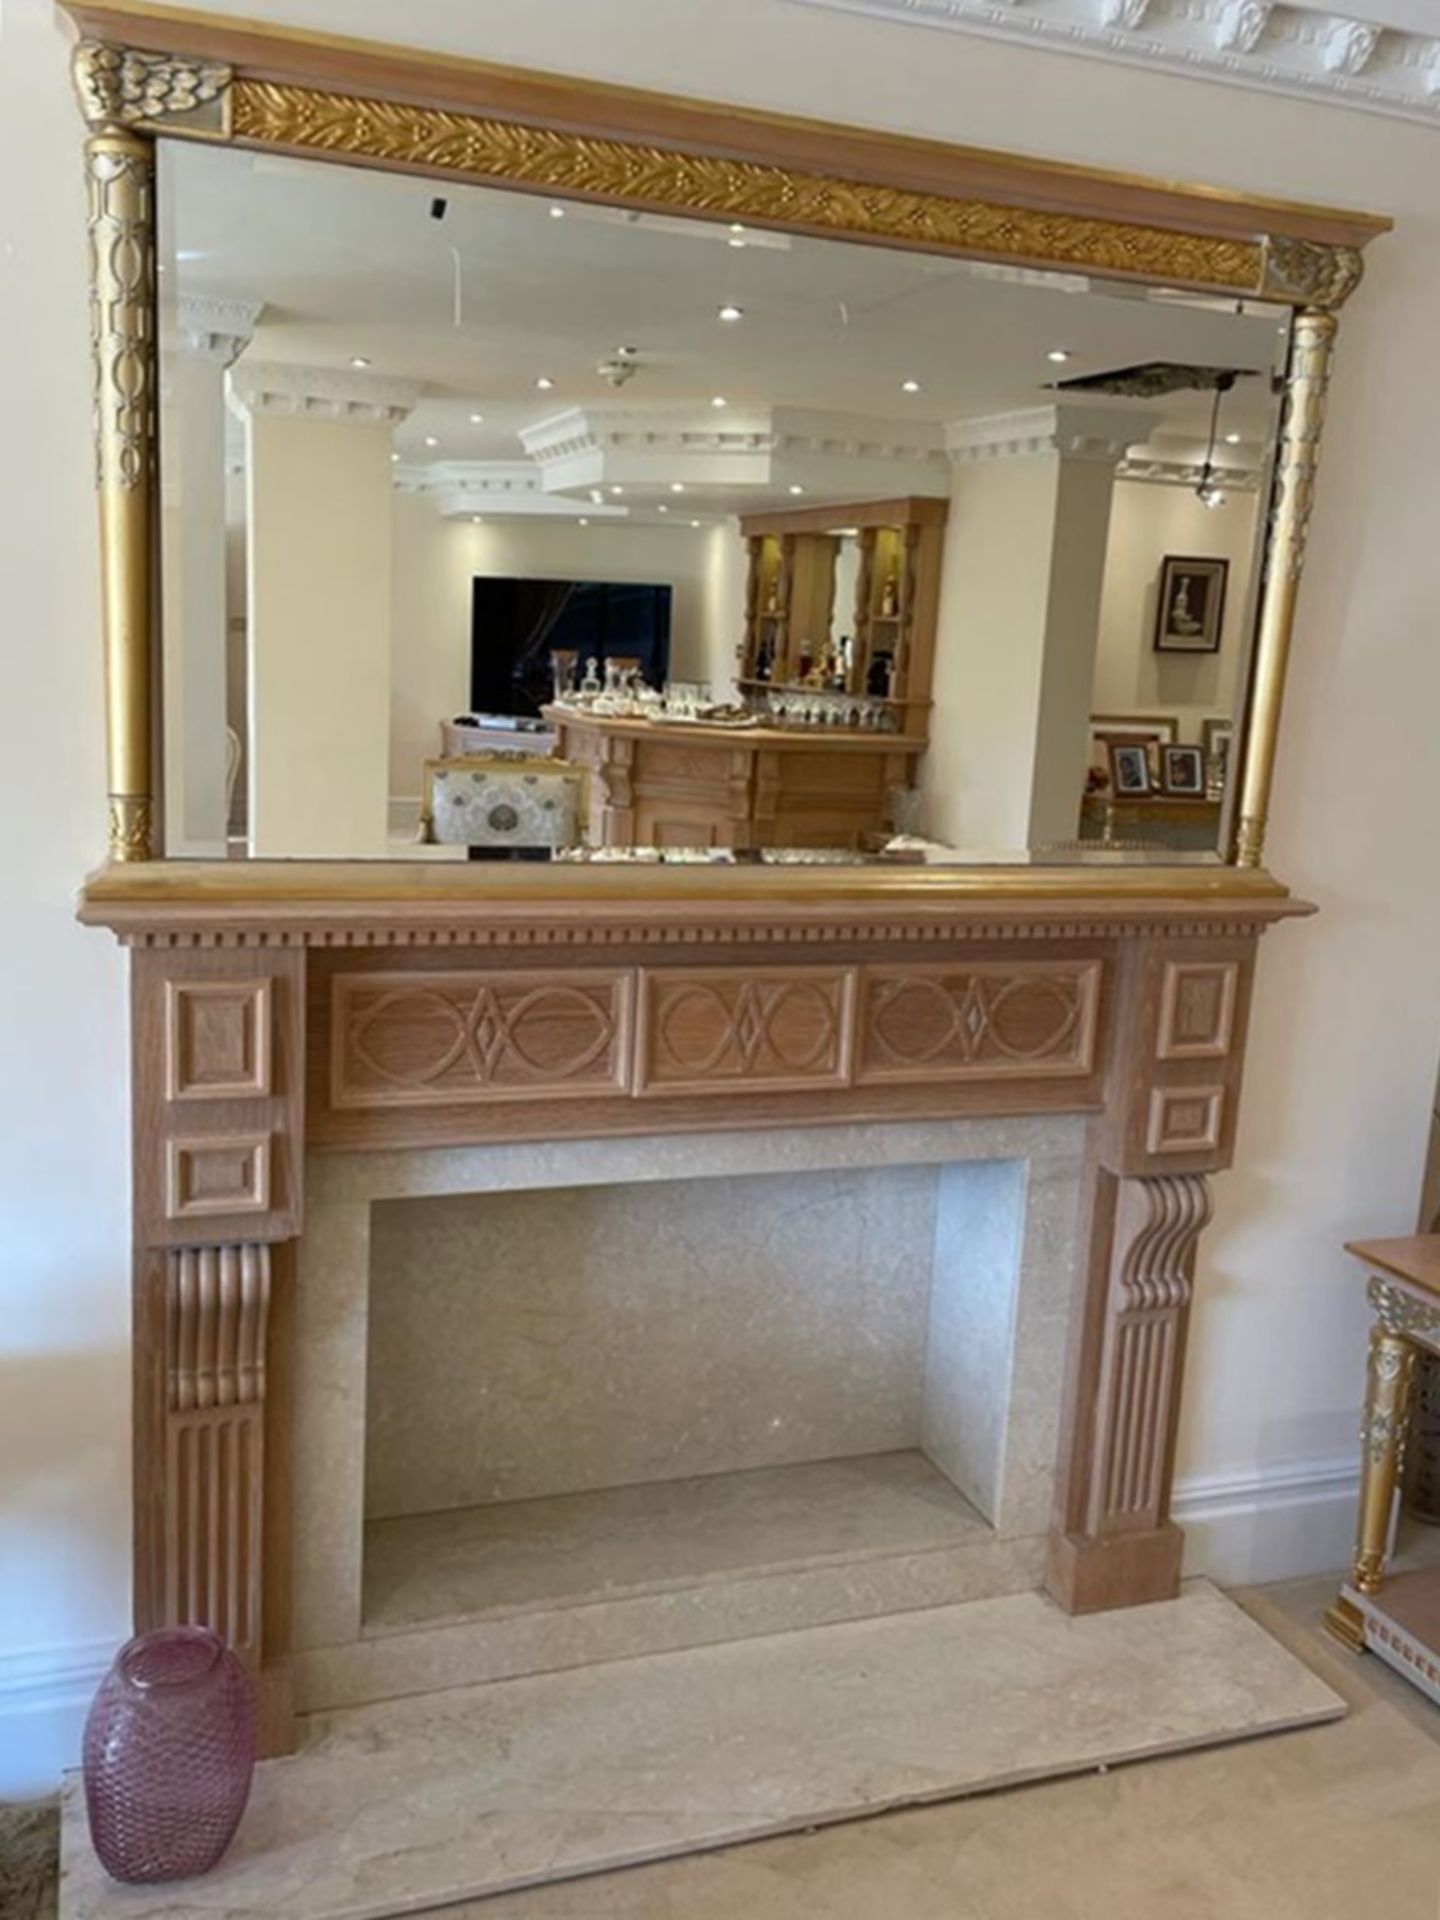 1 x Wooden Fire Surround With Marble Fire Place and Hearth - Size H118 x W174 x D14 cms With 180 x - Image 20 of 21